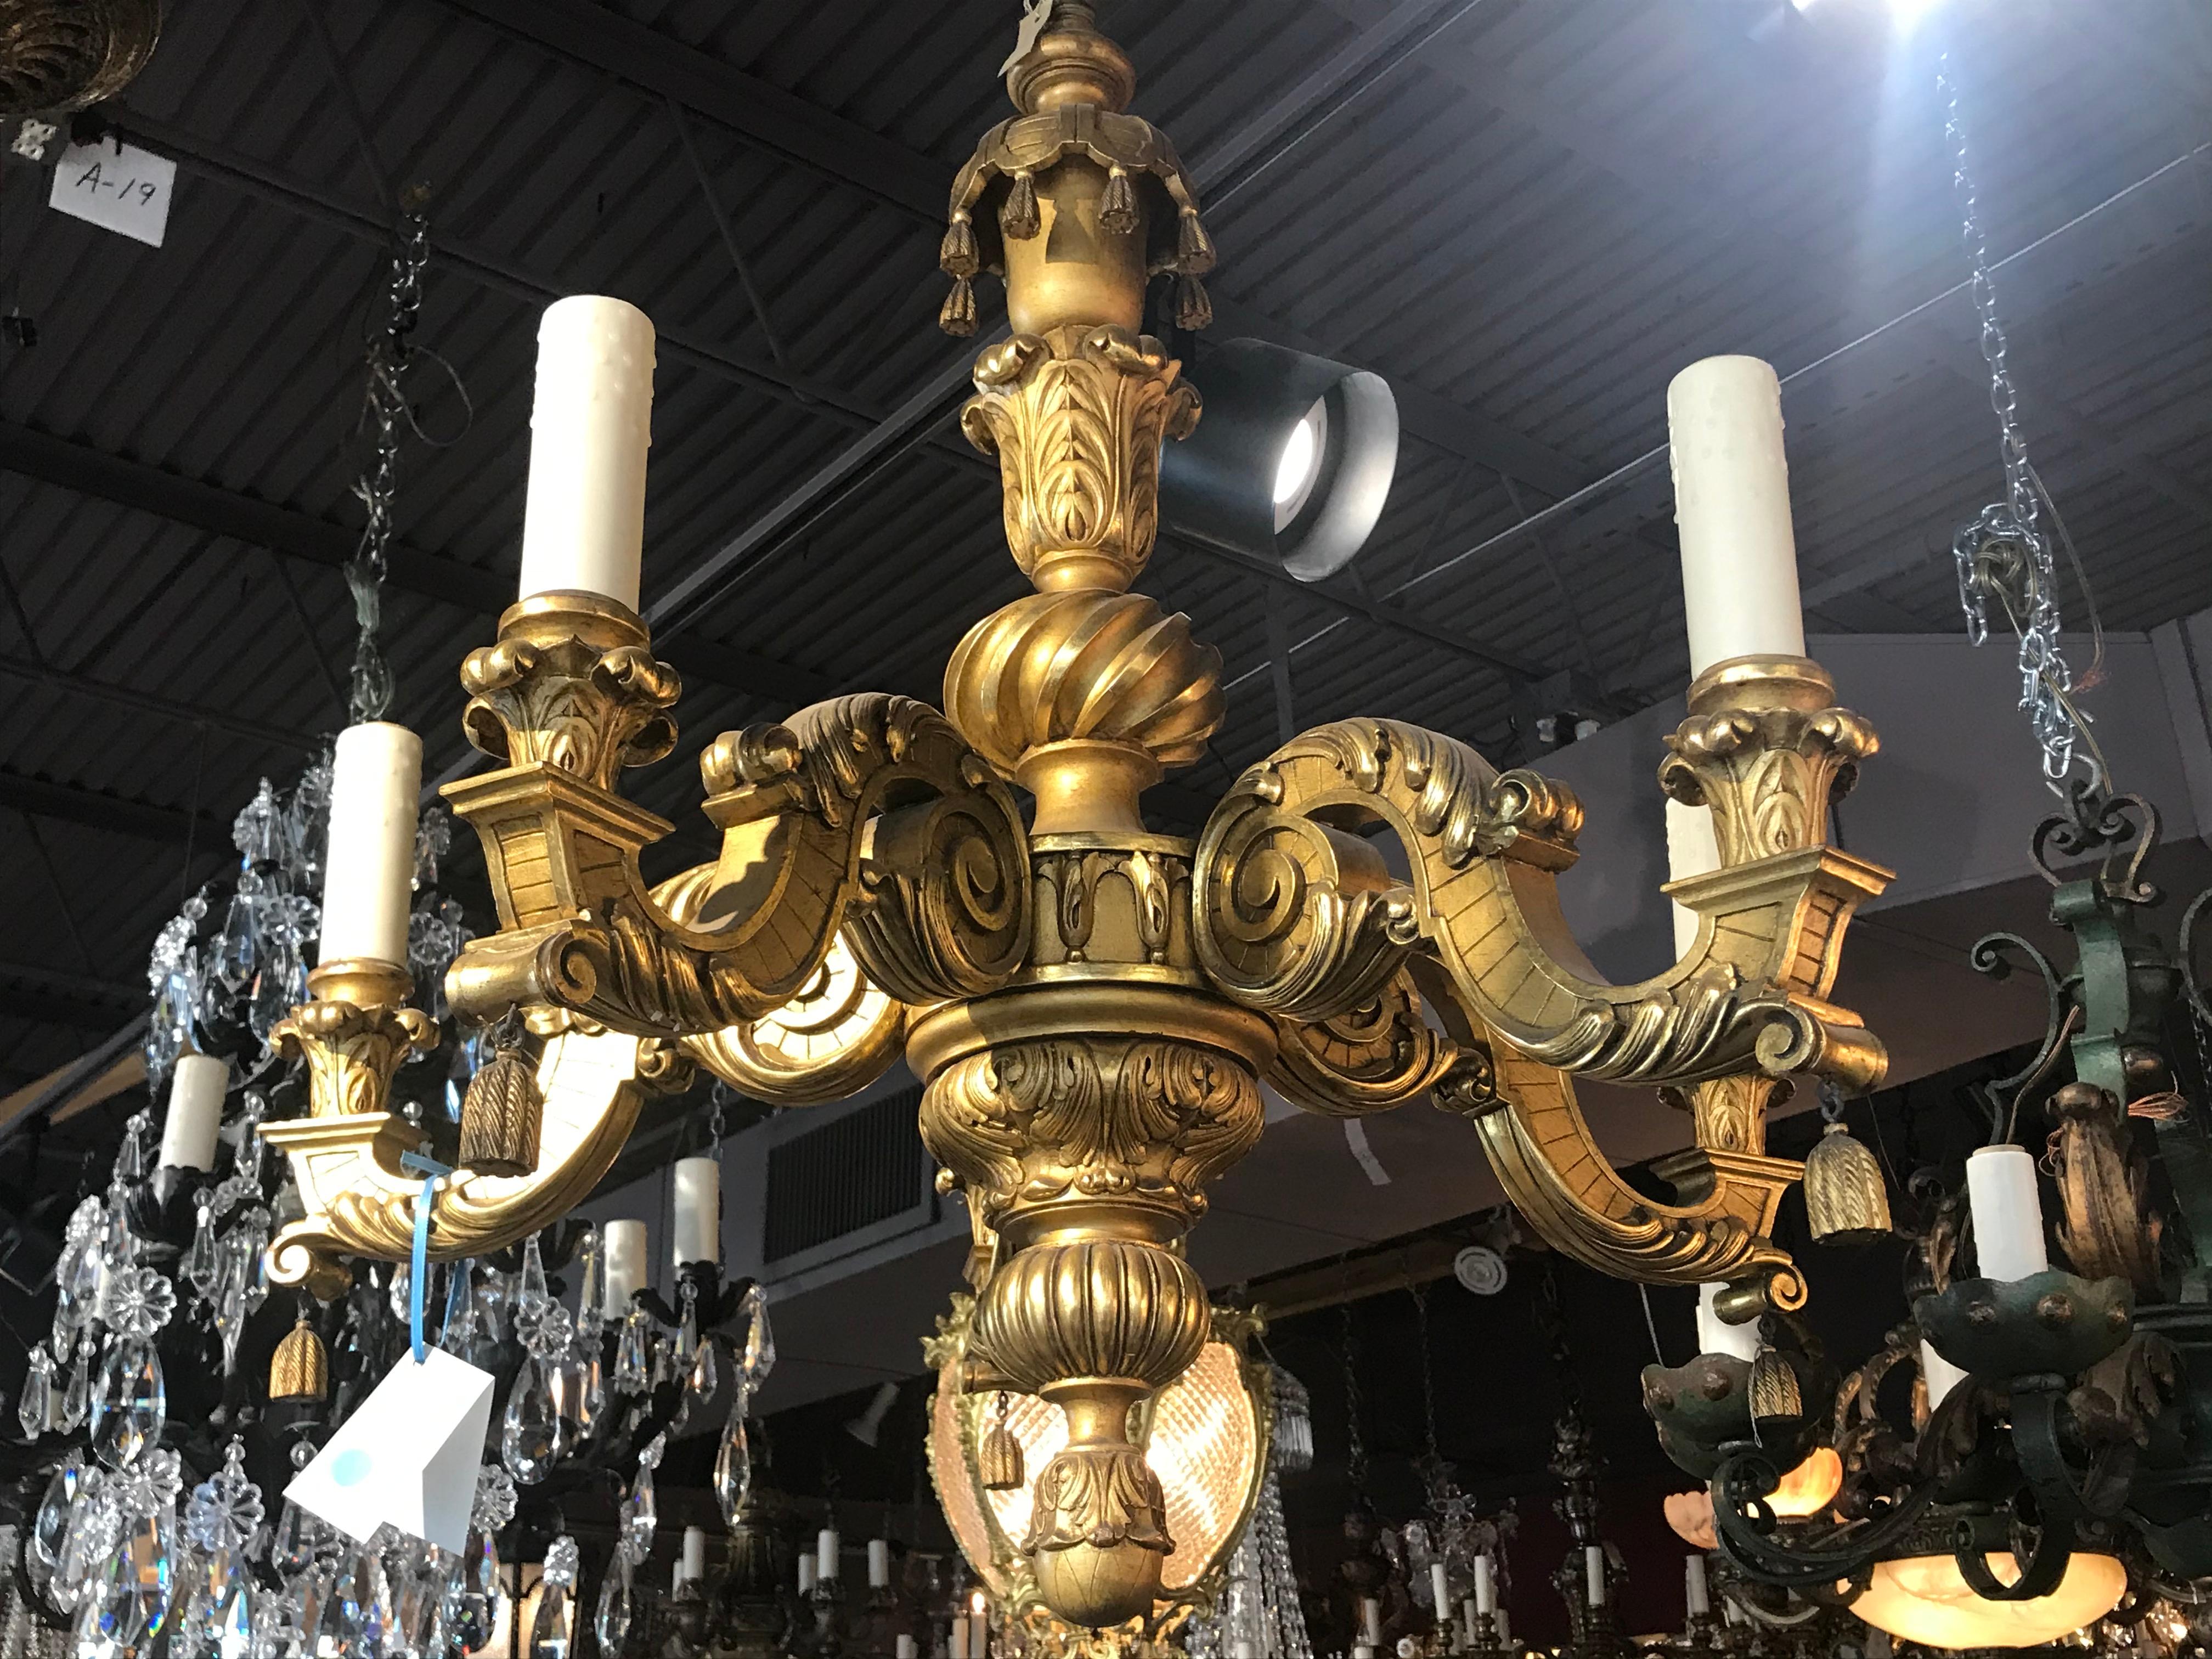 A very fine Regence style giltwood chandelier - original water gilding.
France, circa 1910.
Dimensions: Height 38